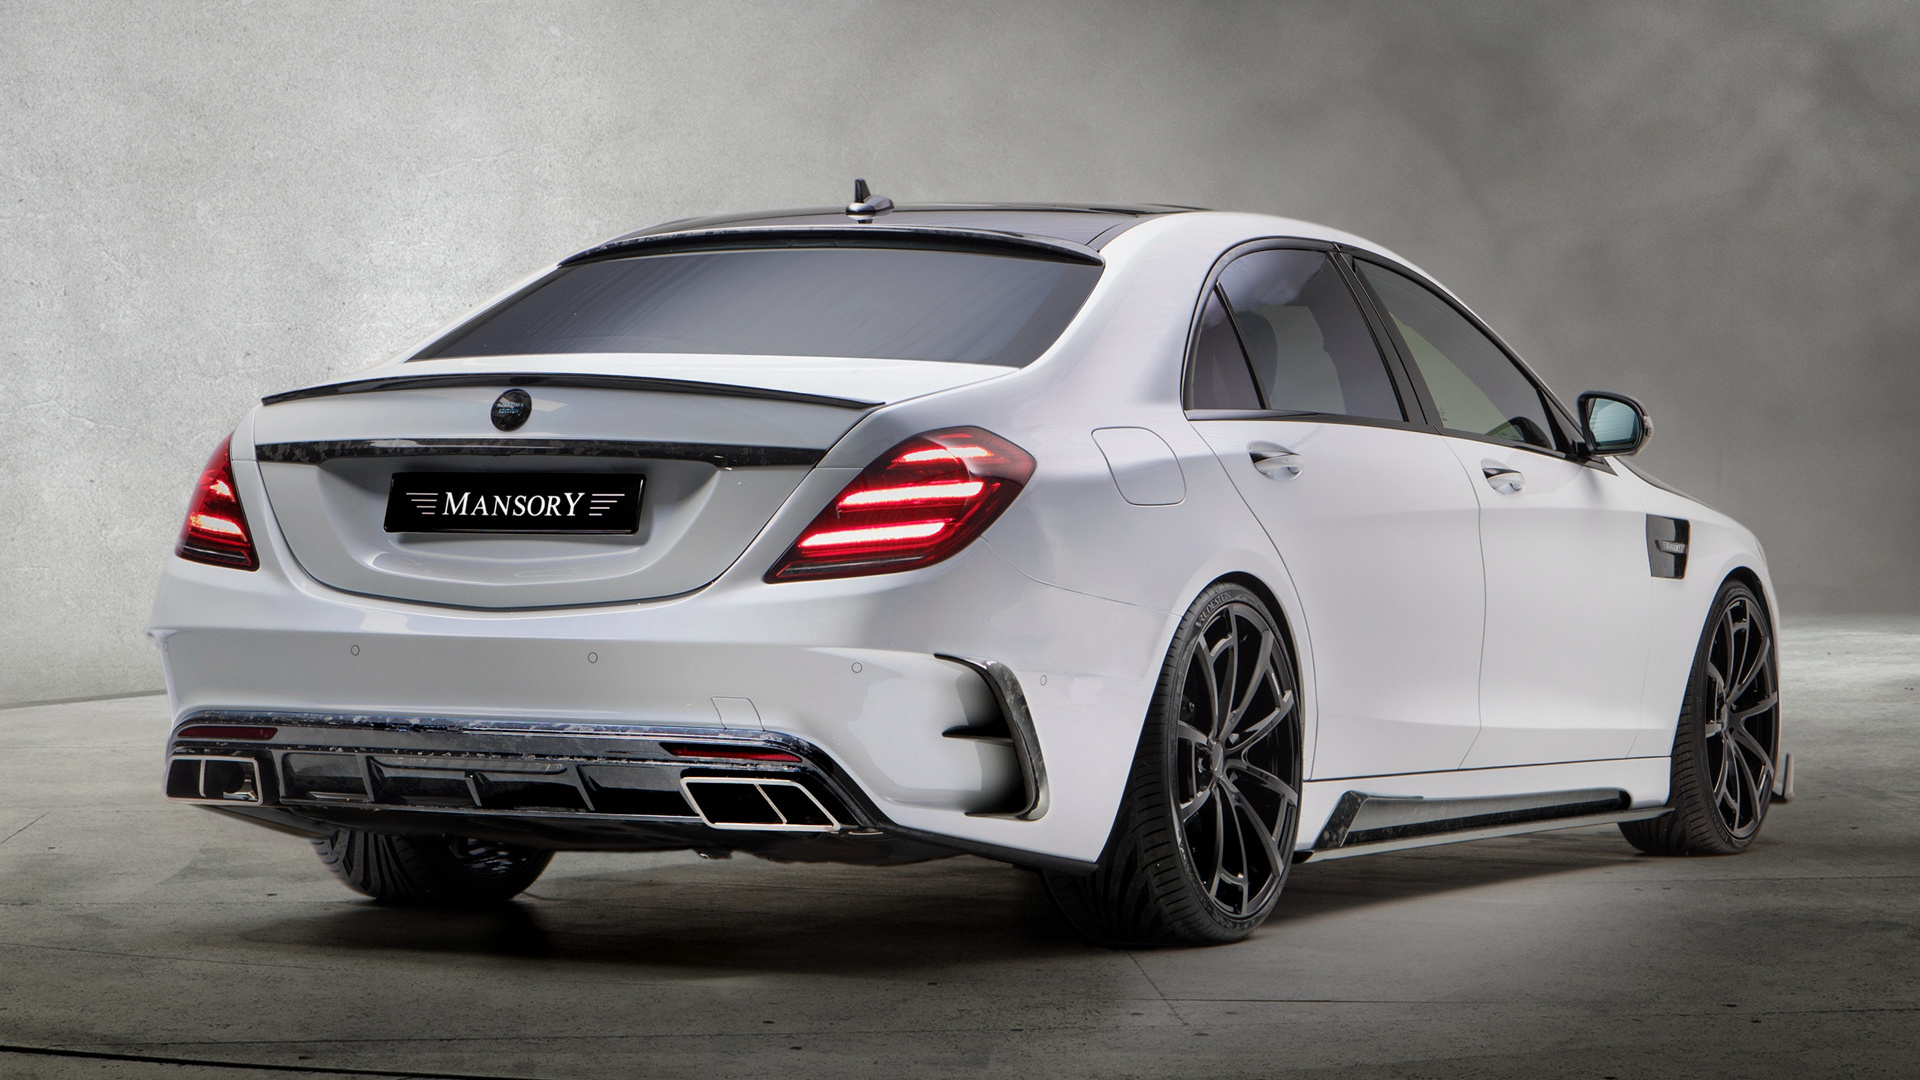 mercedes benz, vehicles, mercedes amg s63, car, mercedes amg s 63 signature edition by mansory, sedan, white car